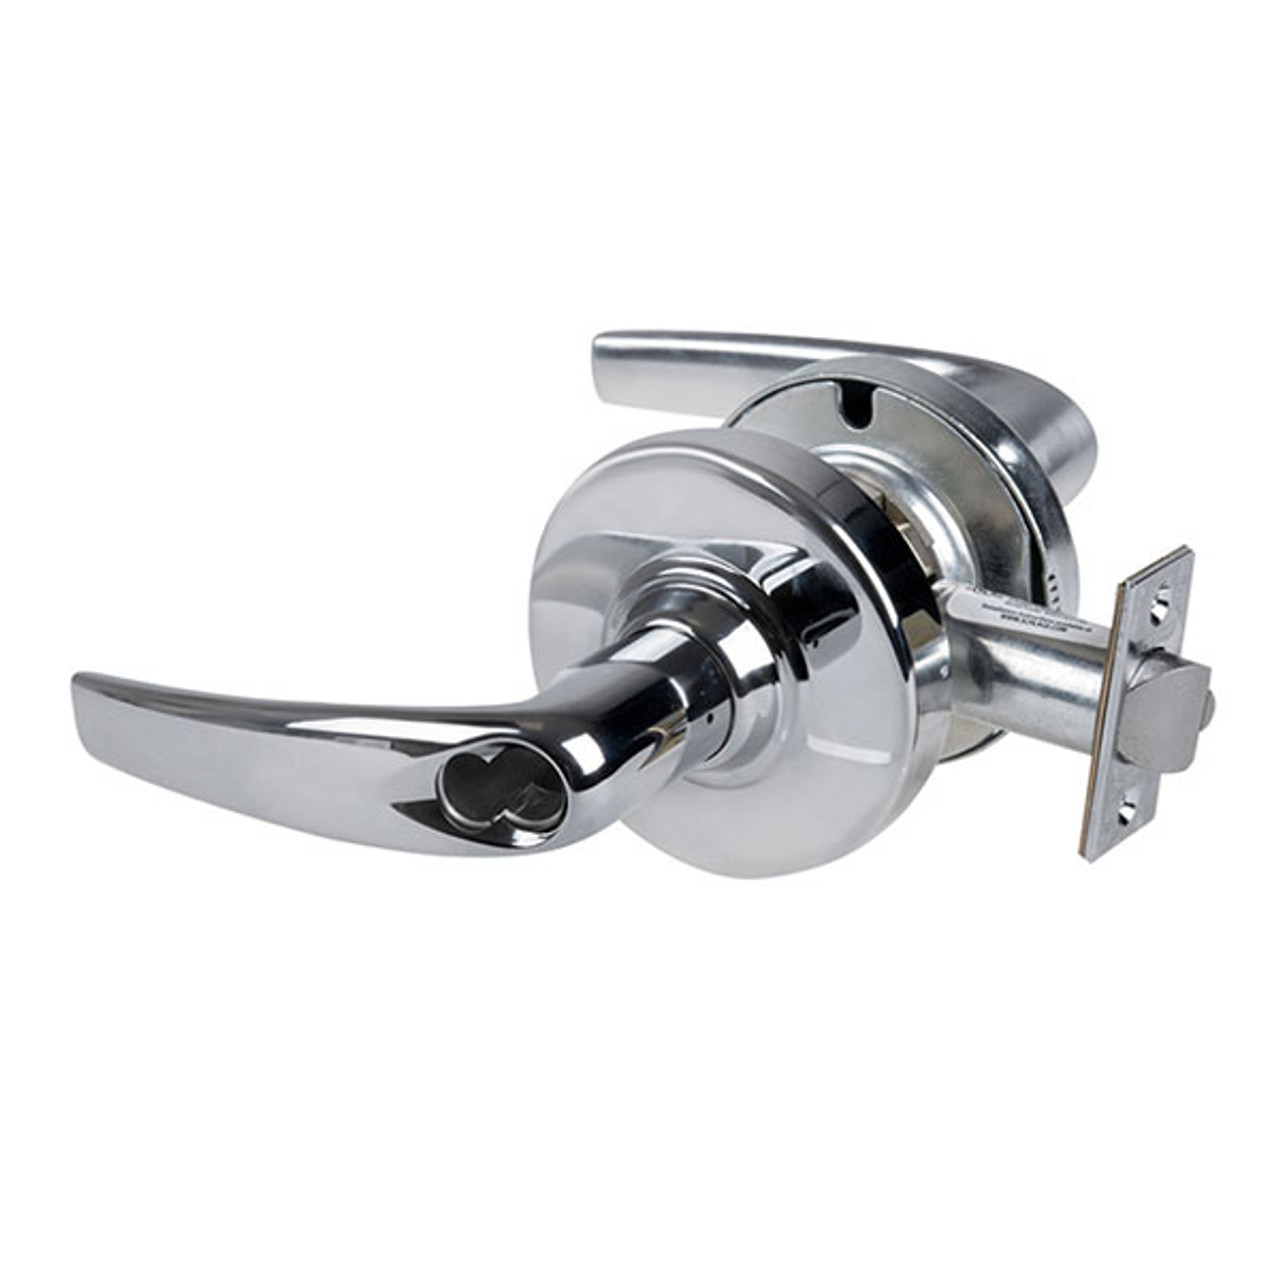 ALX50J-ATH-625 Schlage Athens Cylindrical Lock Prepped for FSIC in Bright Chromium Plated